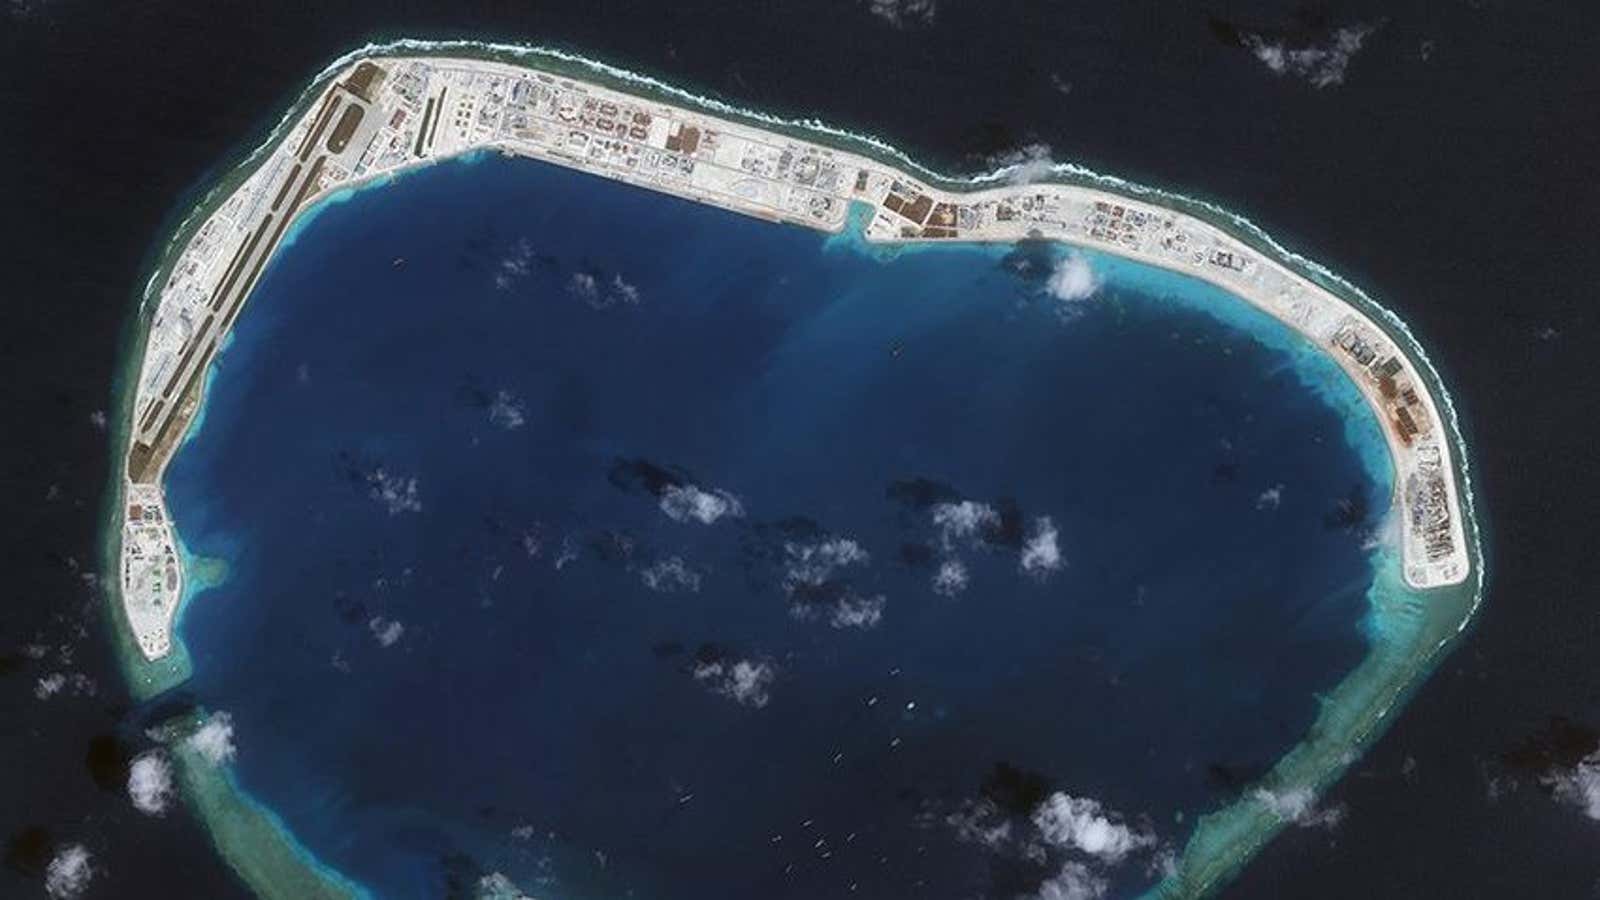 Mischief Reef in the South China Sea (2016).